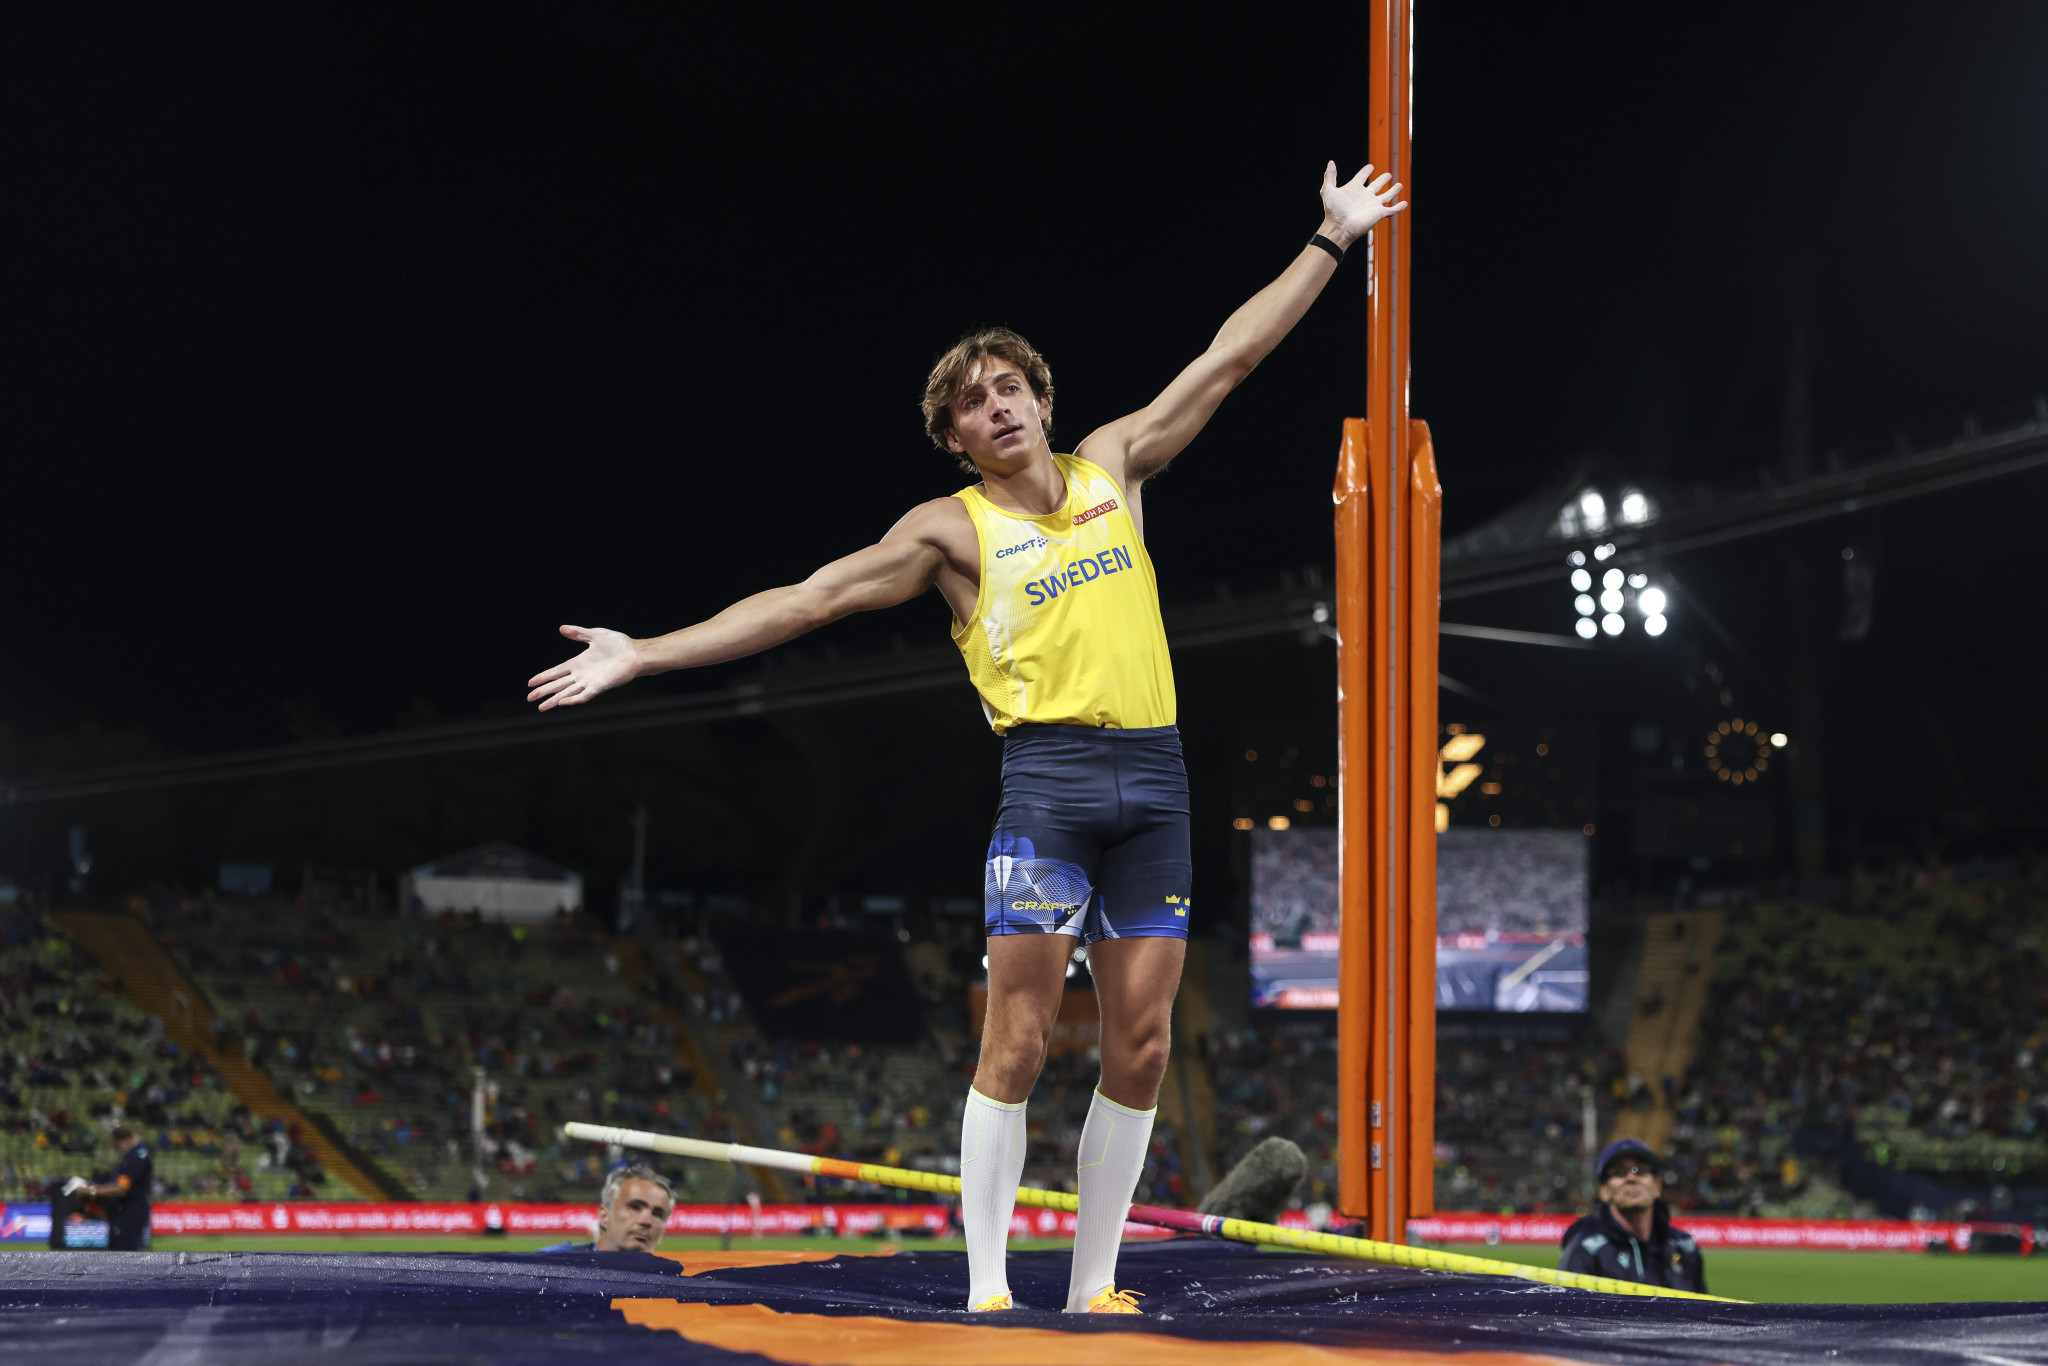 World champion pole vaulter Mondo Duplantis of Sweden has been nominated for the award among men ©Getty Images